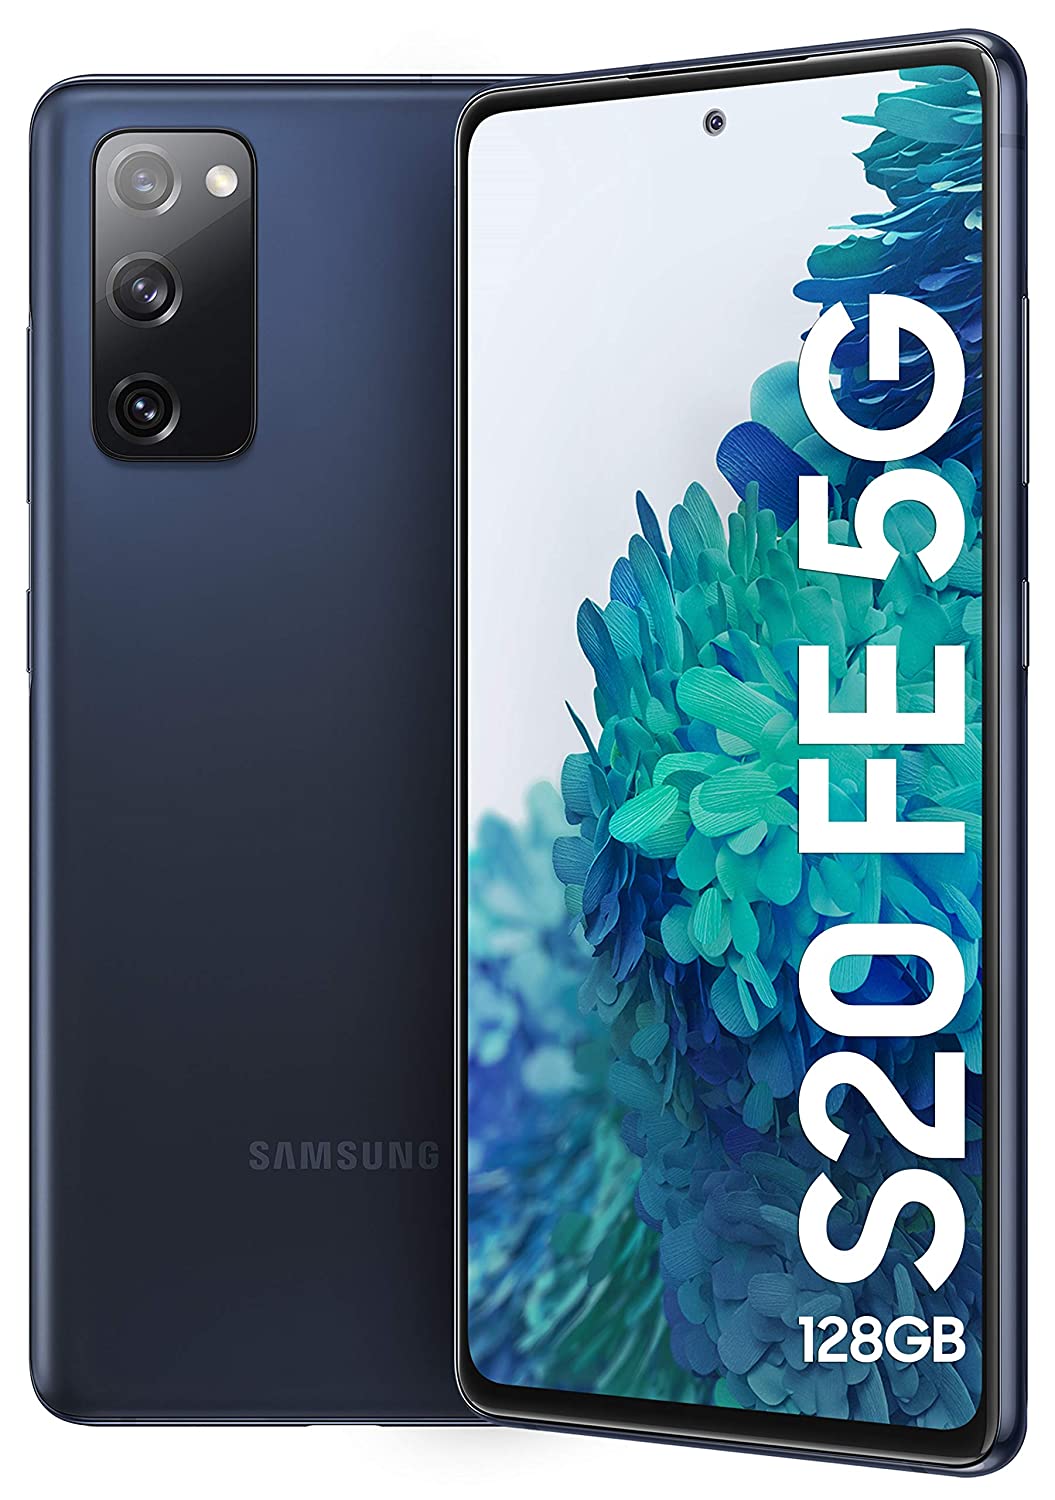 Buy Samsung Galaxy S20 FE 5G (Cloud Navy, 8GB RAM, 128GB Storage) with No Cost EMI + Apply Rs.3,900 Coupon